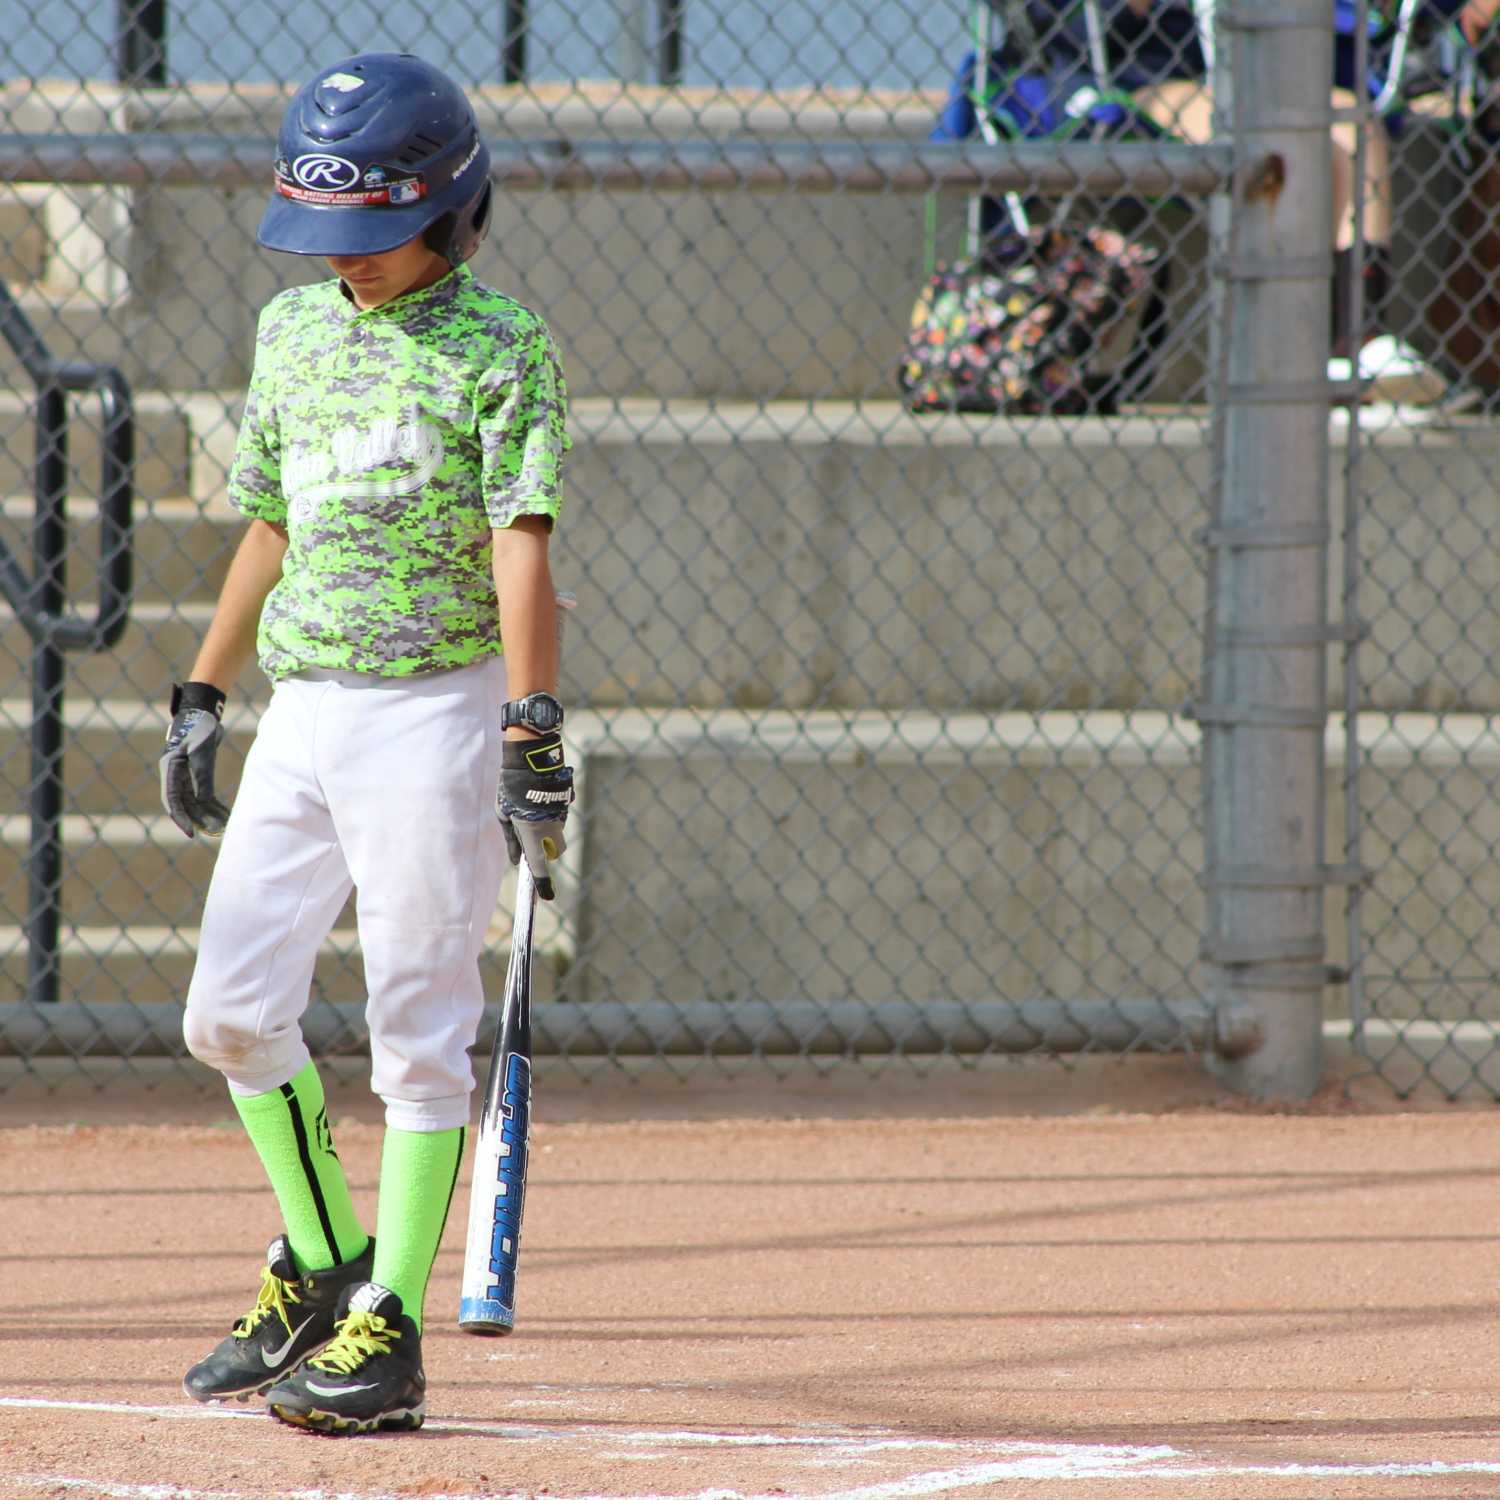 LITTLE LEAGUE DRAMA AND THE TRAGEDY IN UVALDE